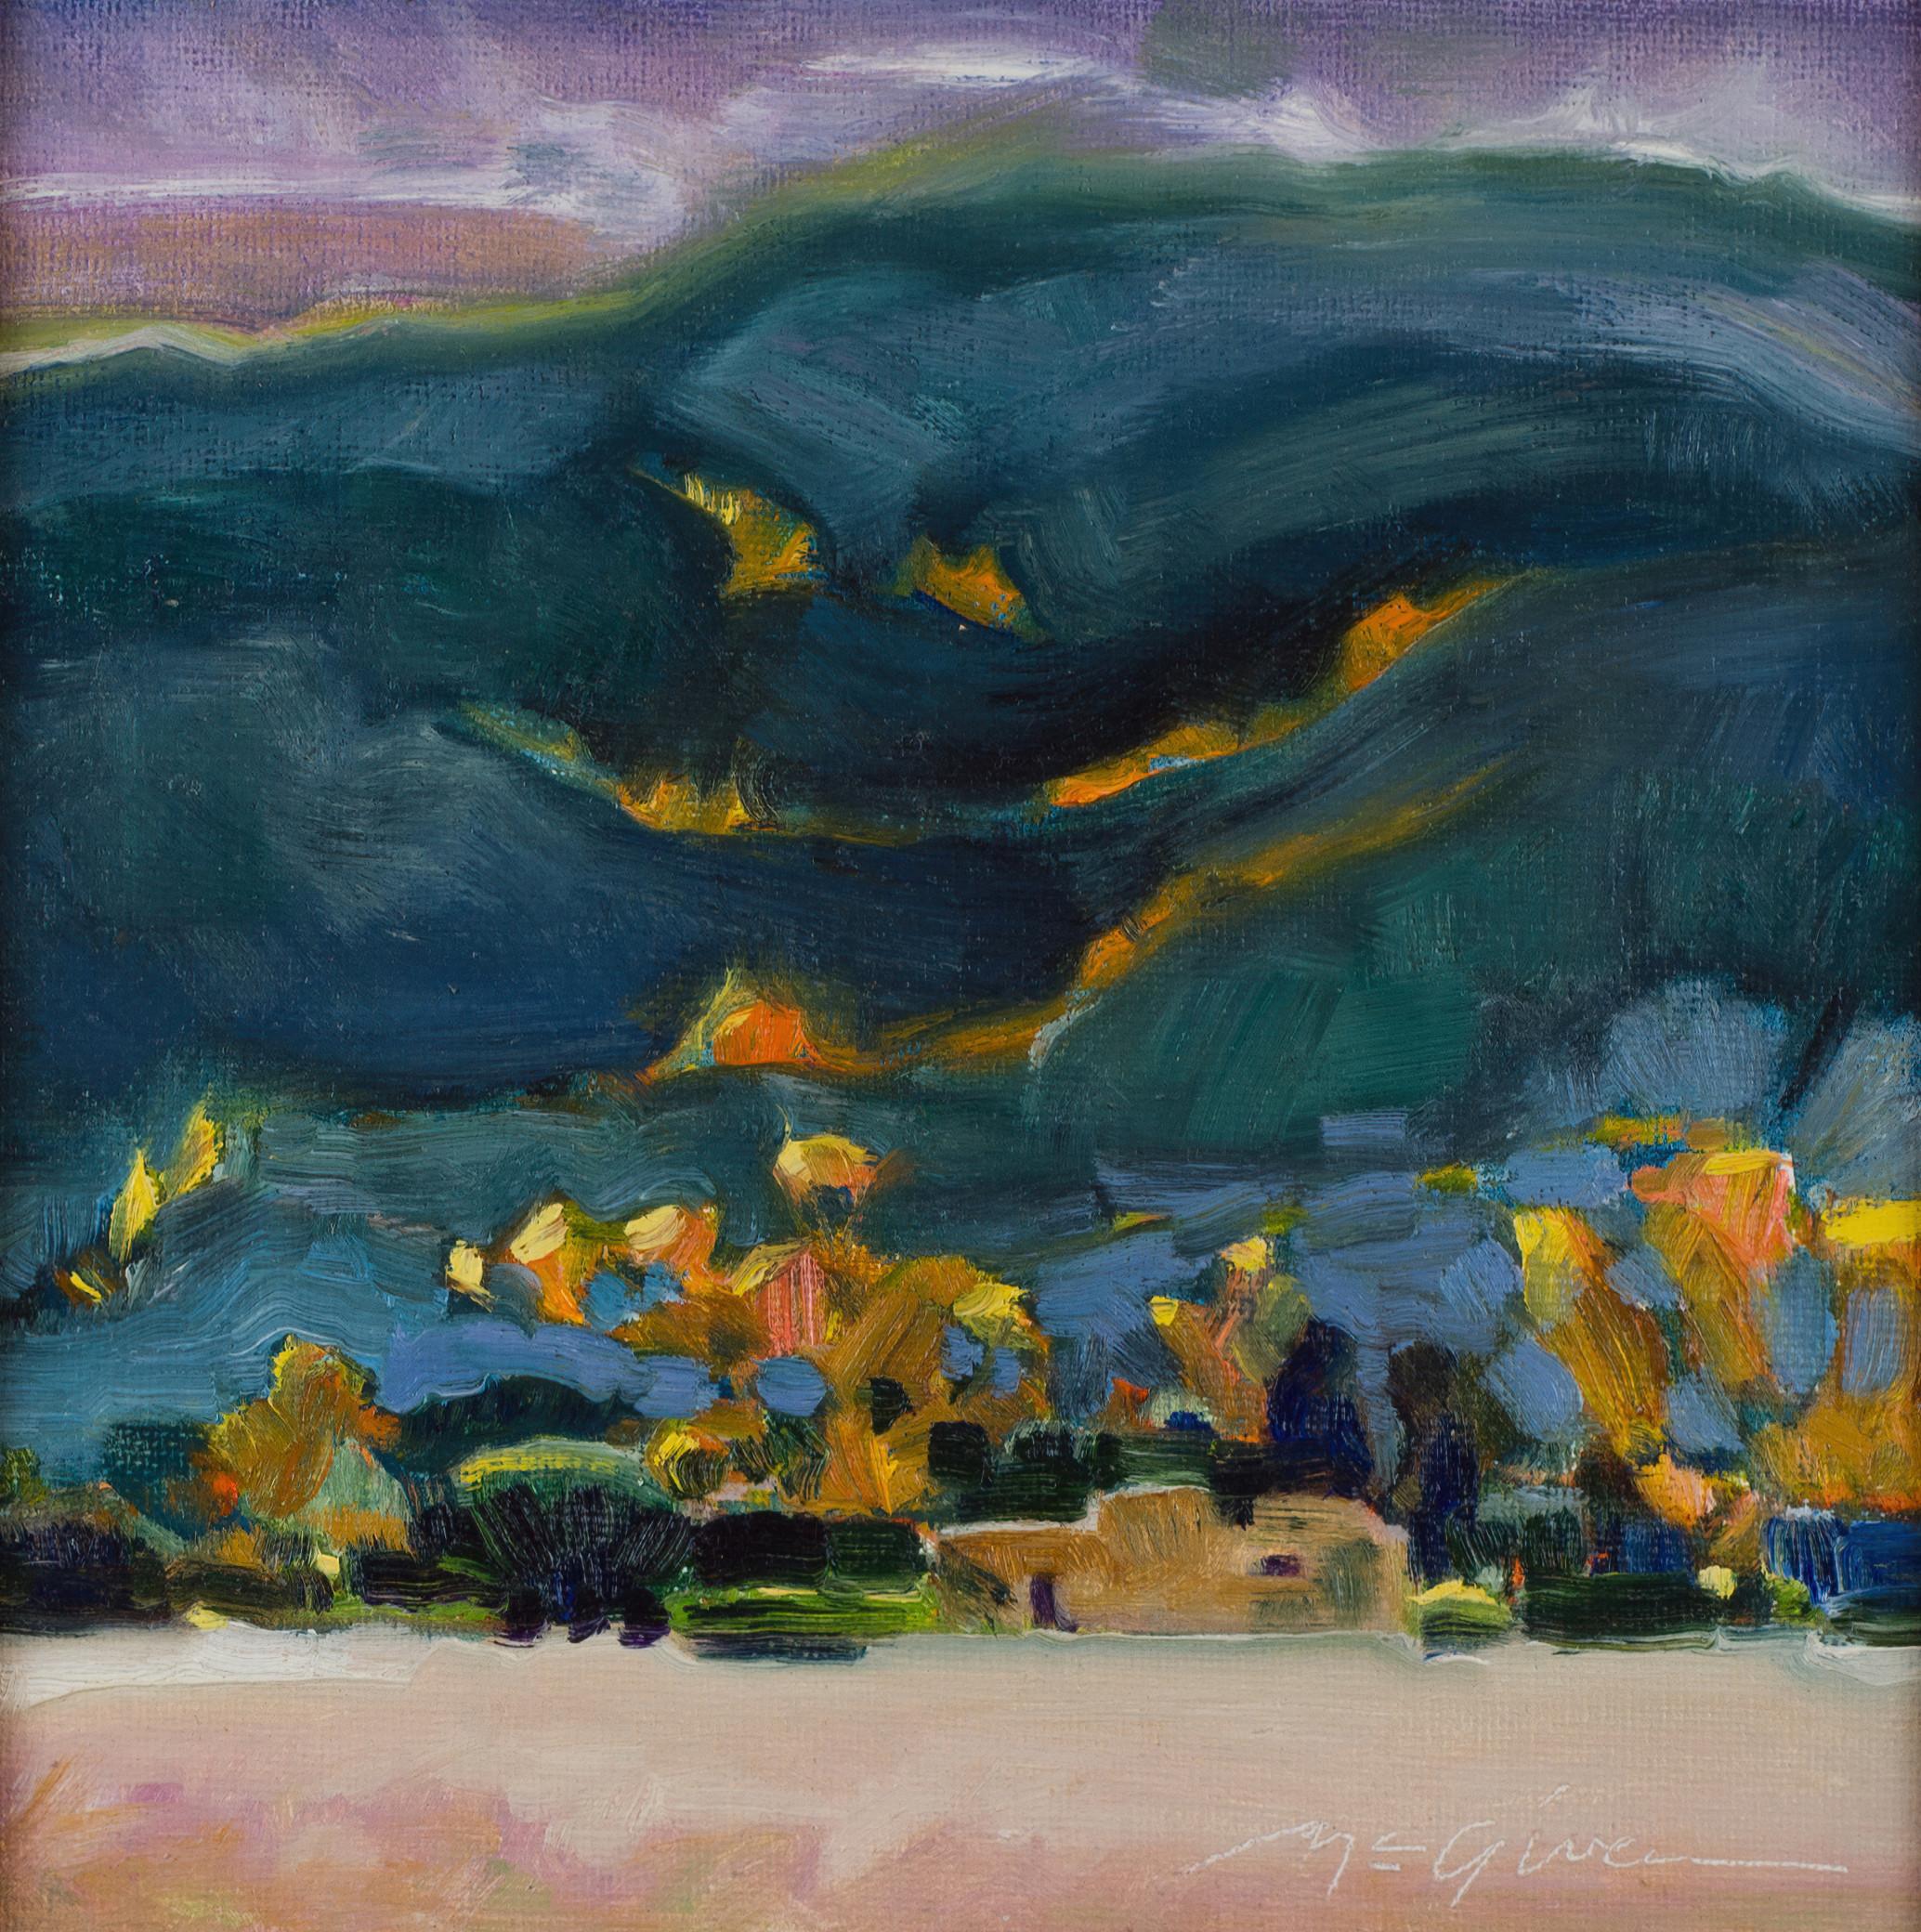 Peggy McGivern Landscape Painting - "Fire on the Mountain" Abstracted Landscape Oil Painting  